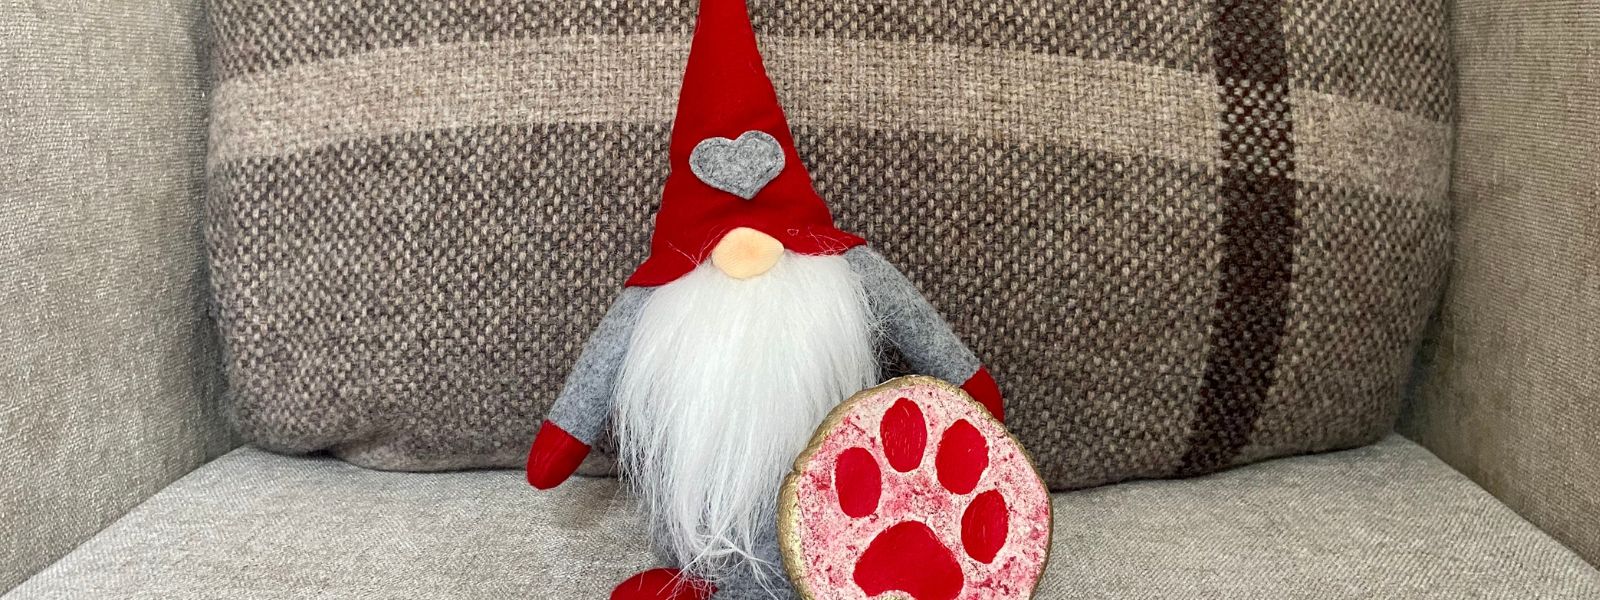 Homemade festive decorations with your dog